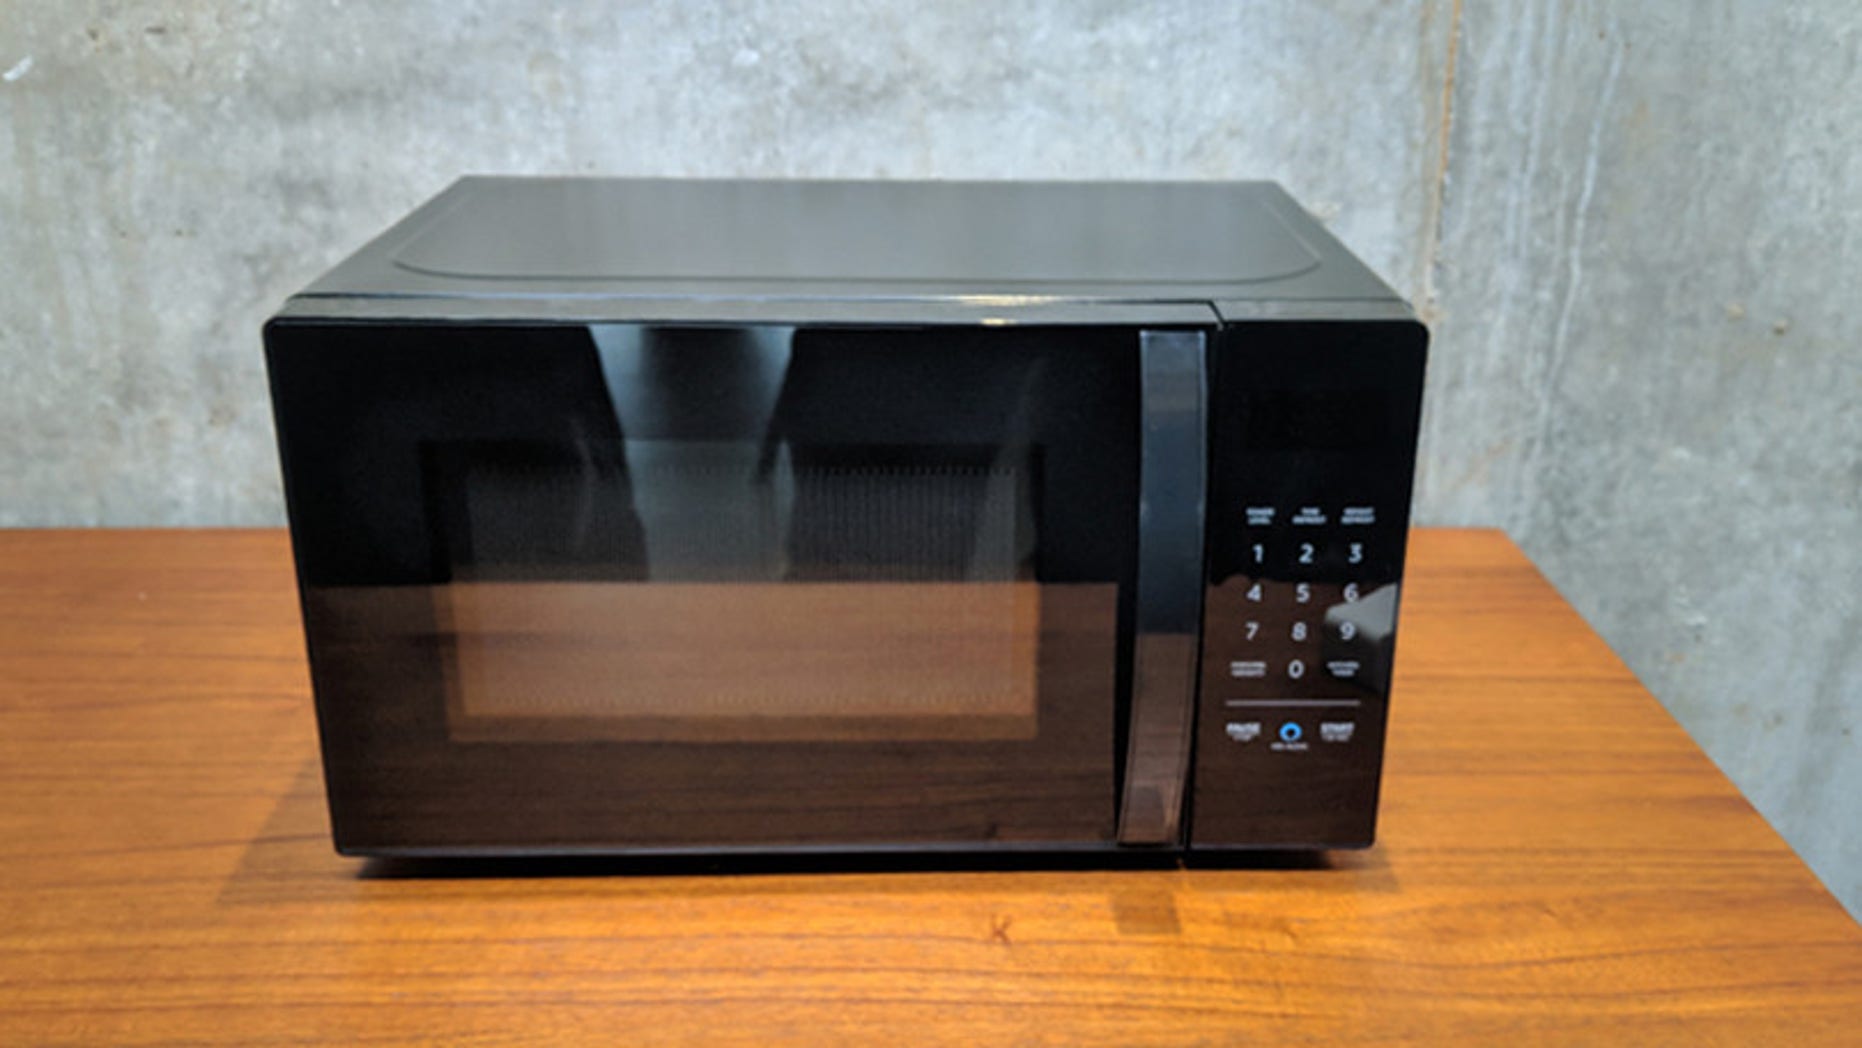 The proper use of a microwave oven is currently under debate in Jacksonville, Florida.